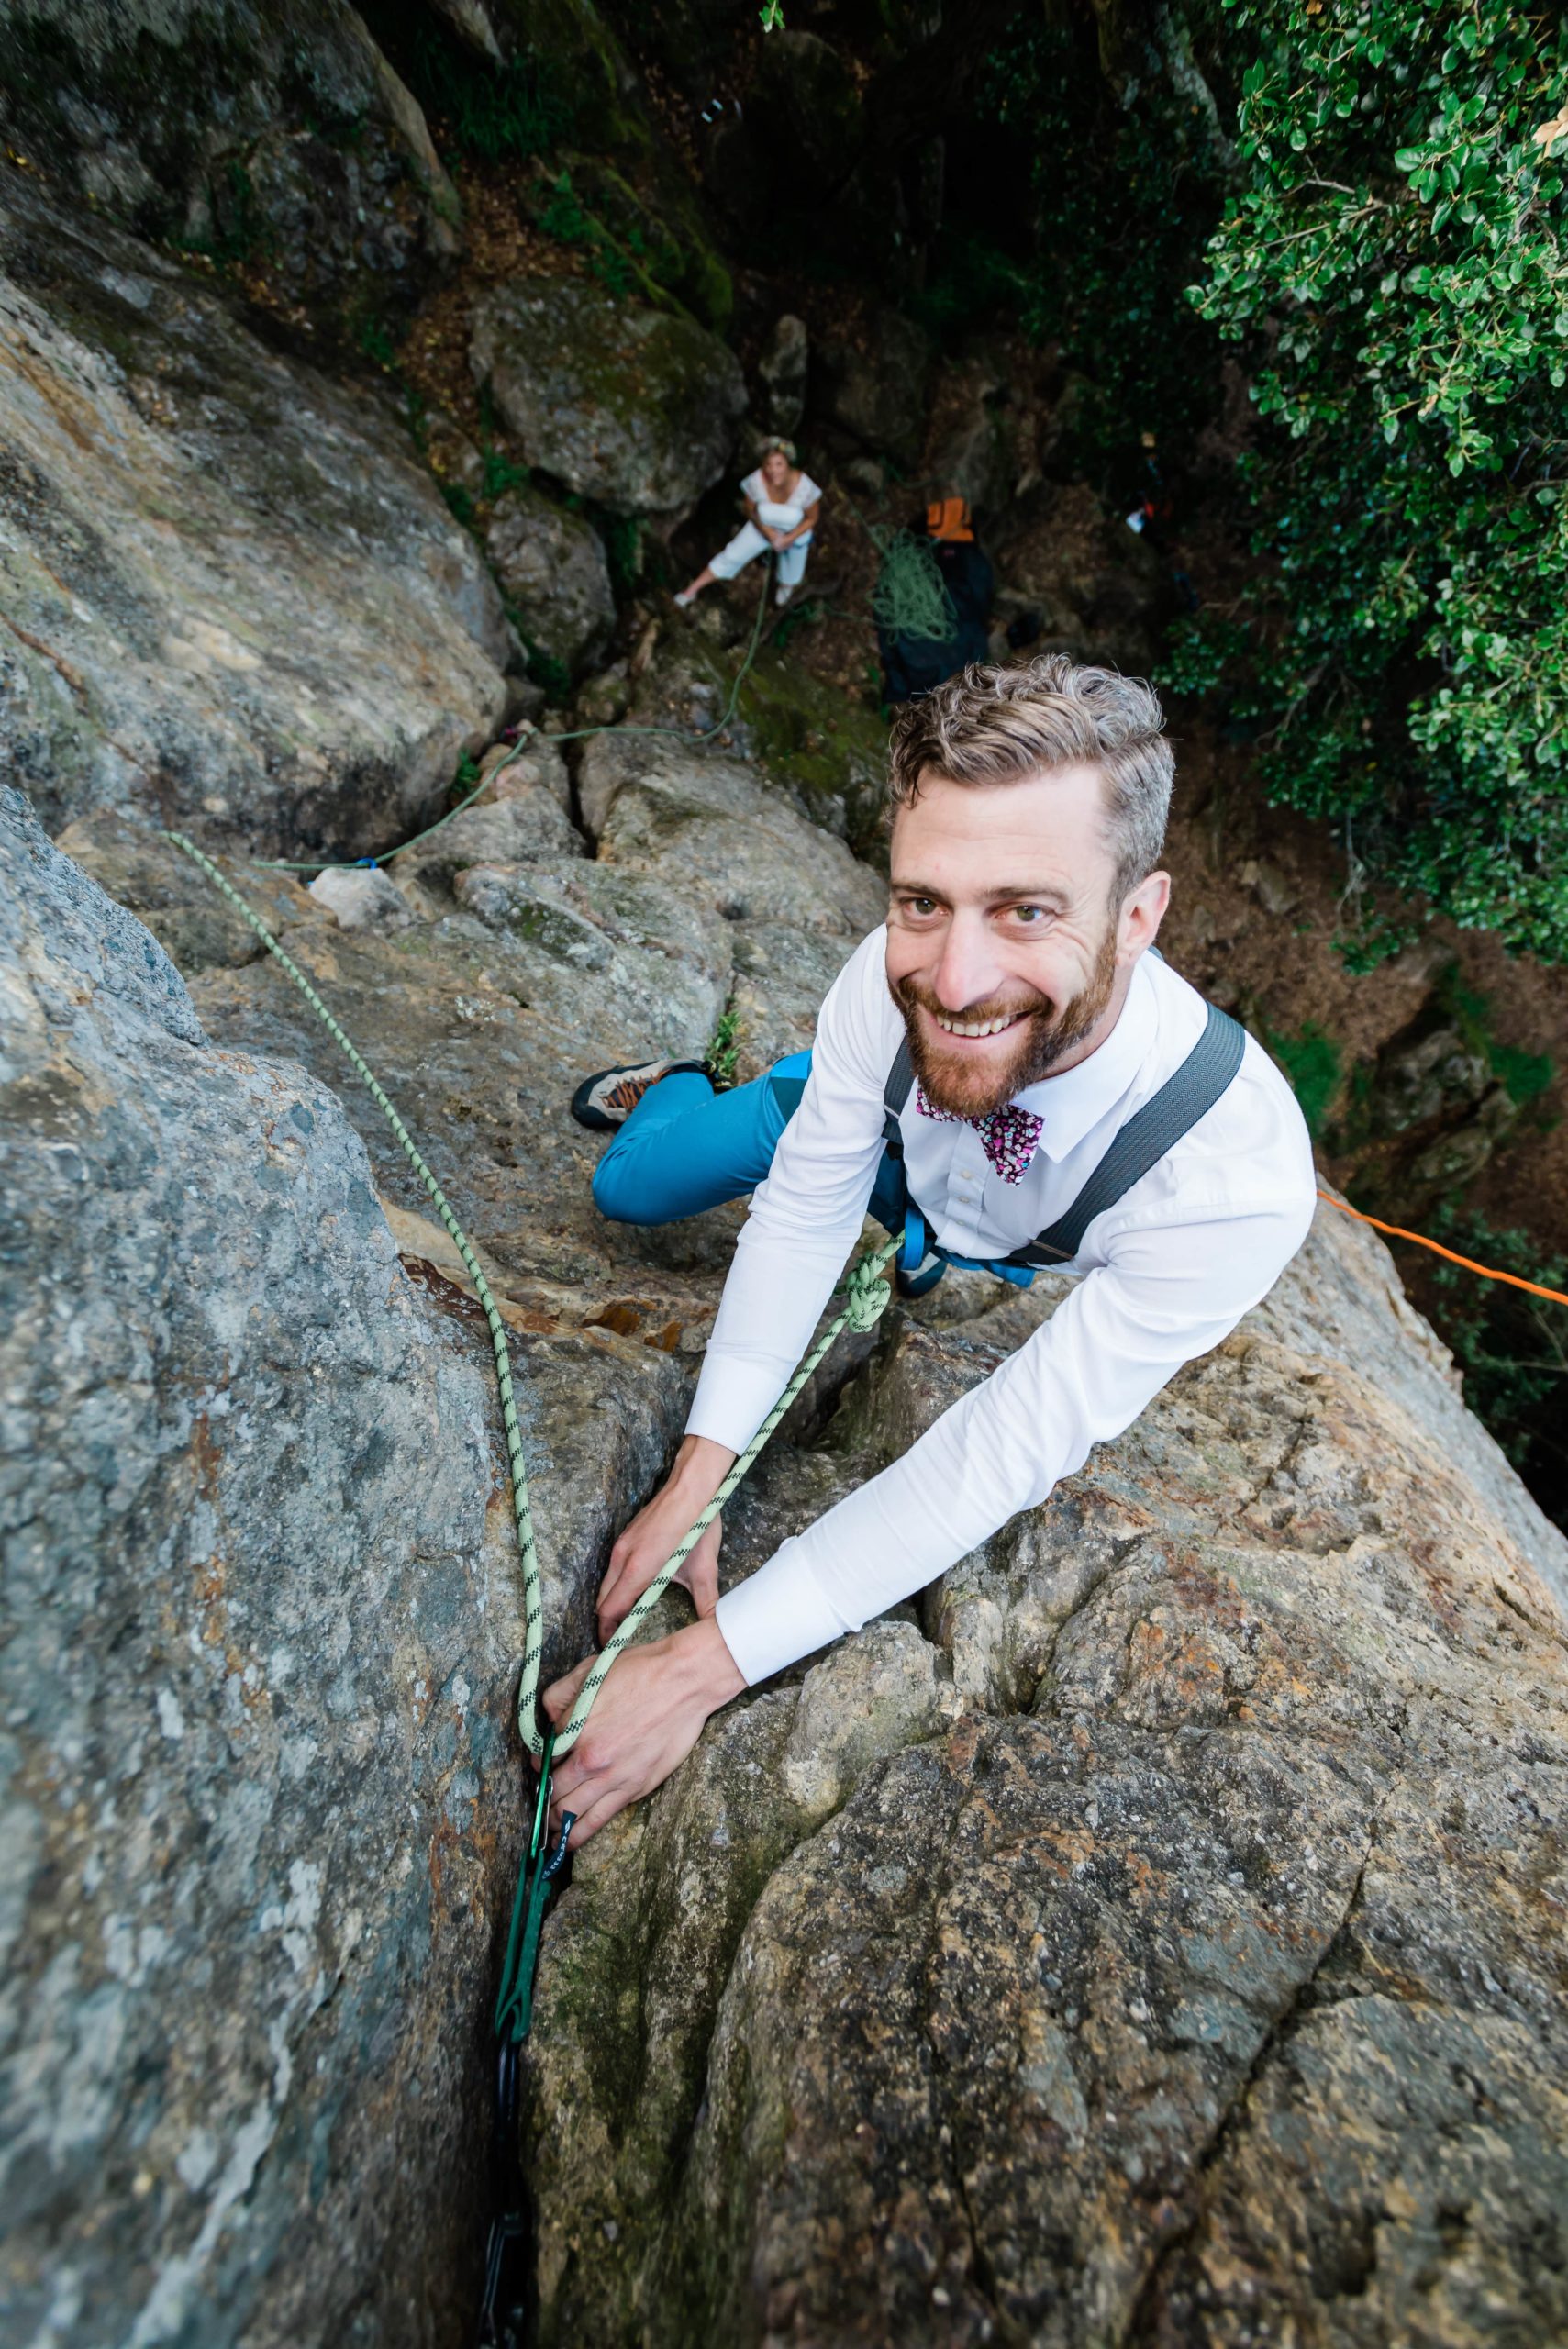 This is a groom rock climbing.